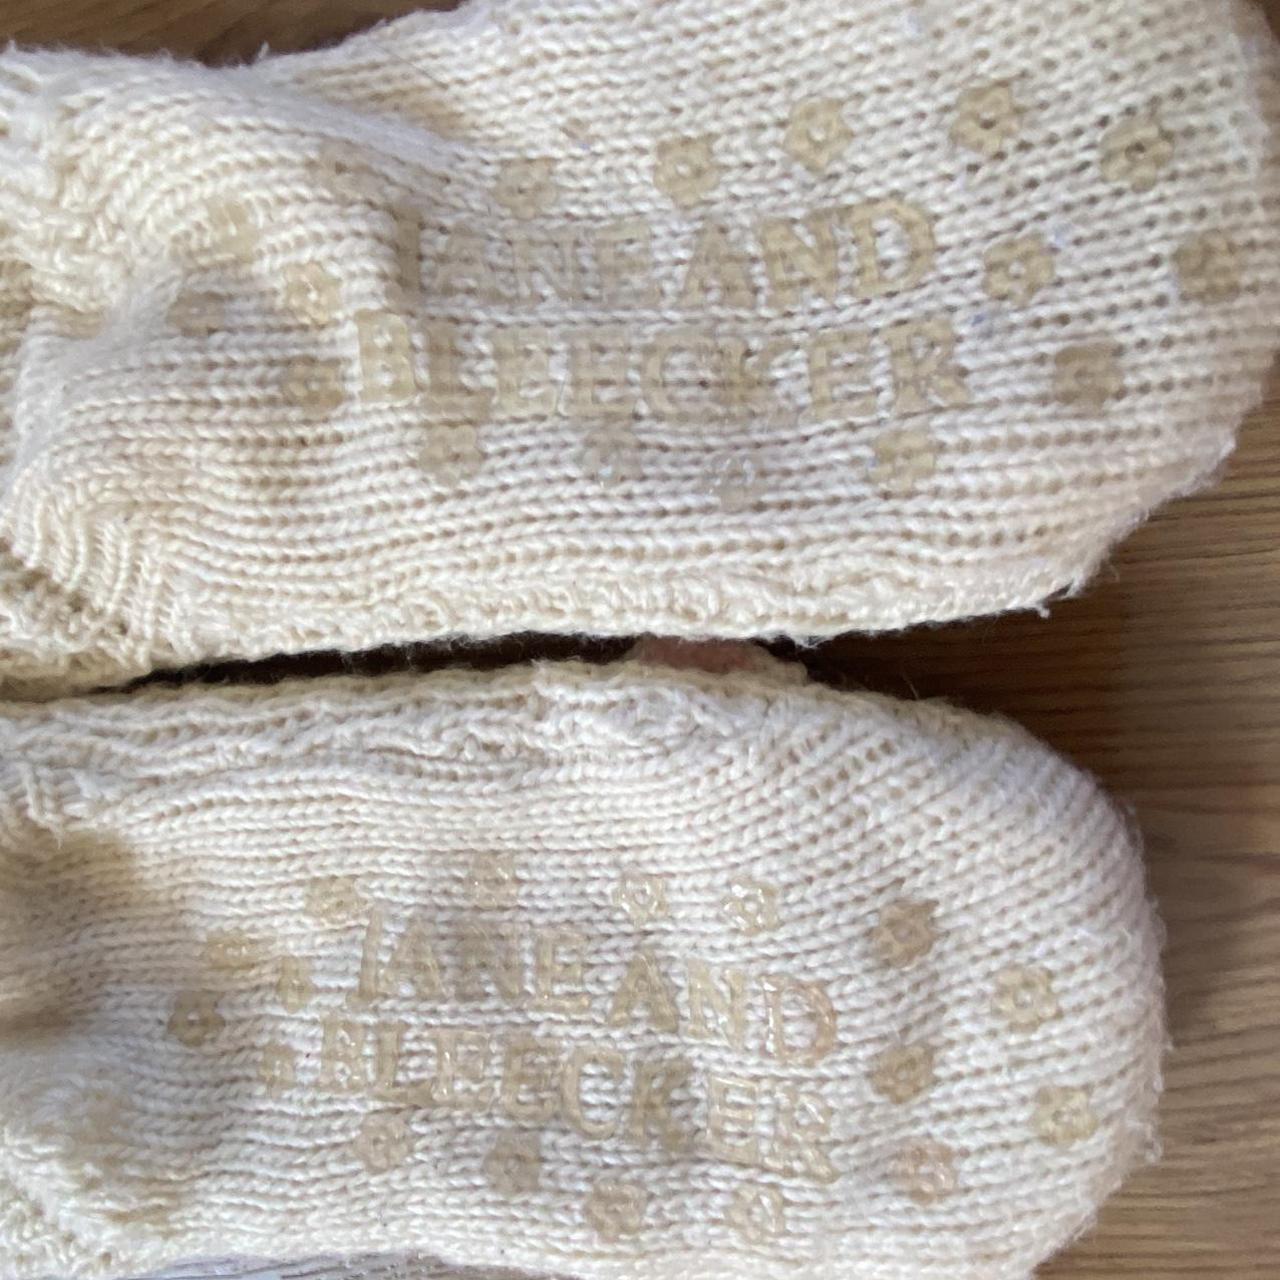 Product Image 4 - Slipper socks. One size. Lined.